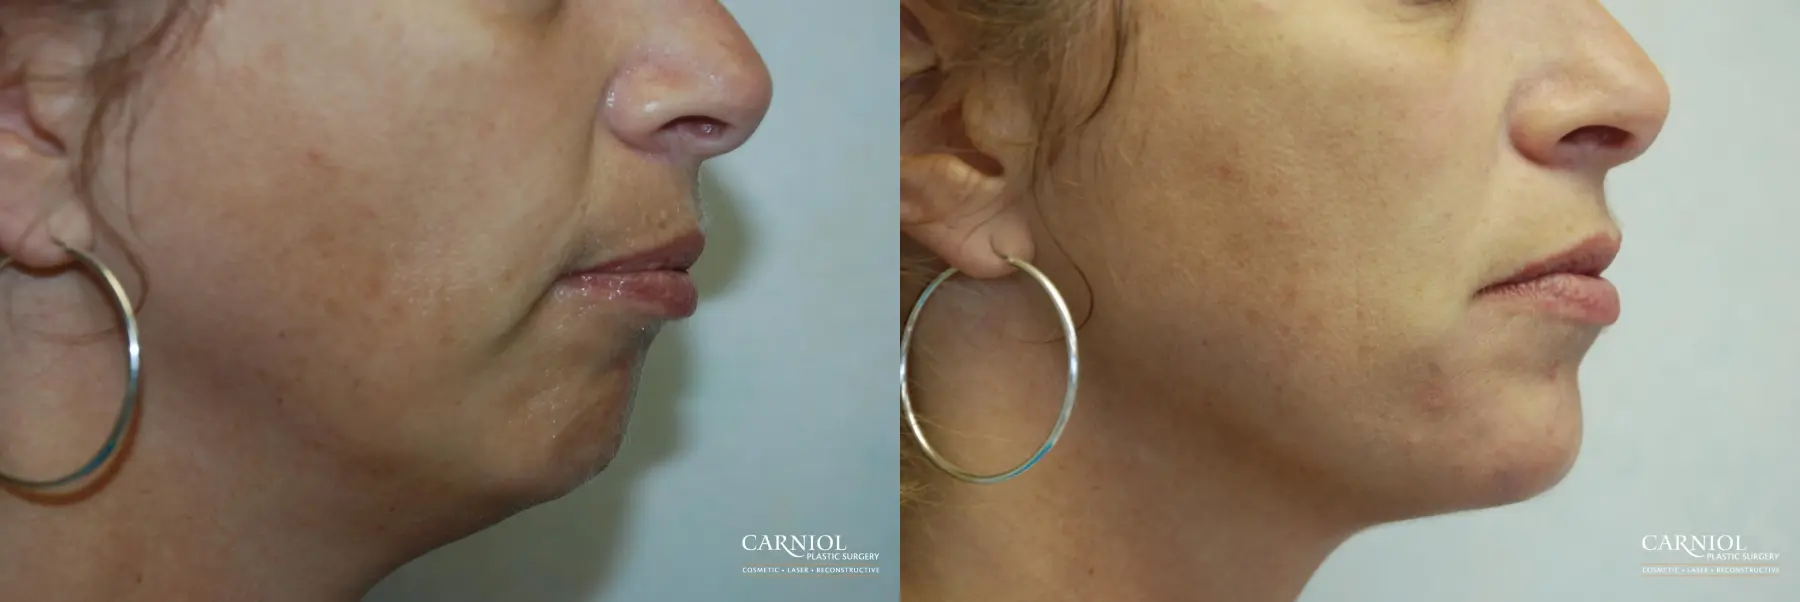 Facial Tightening: Patient 3 - Before and After  